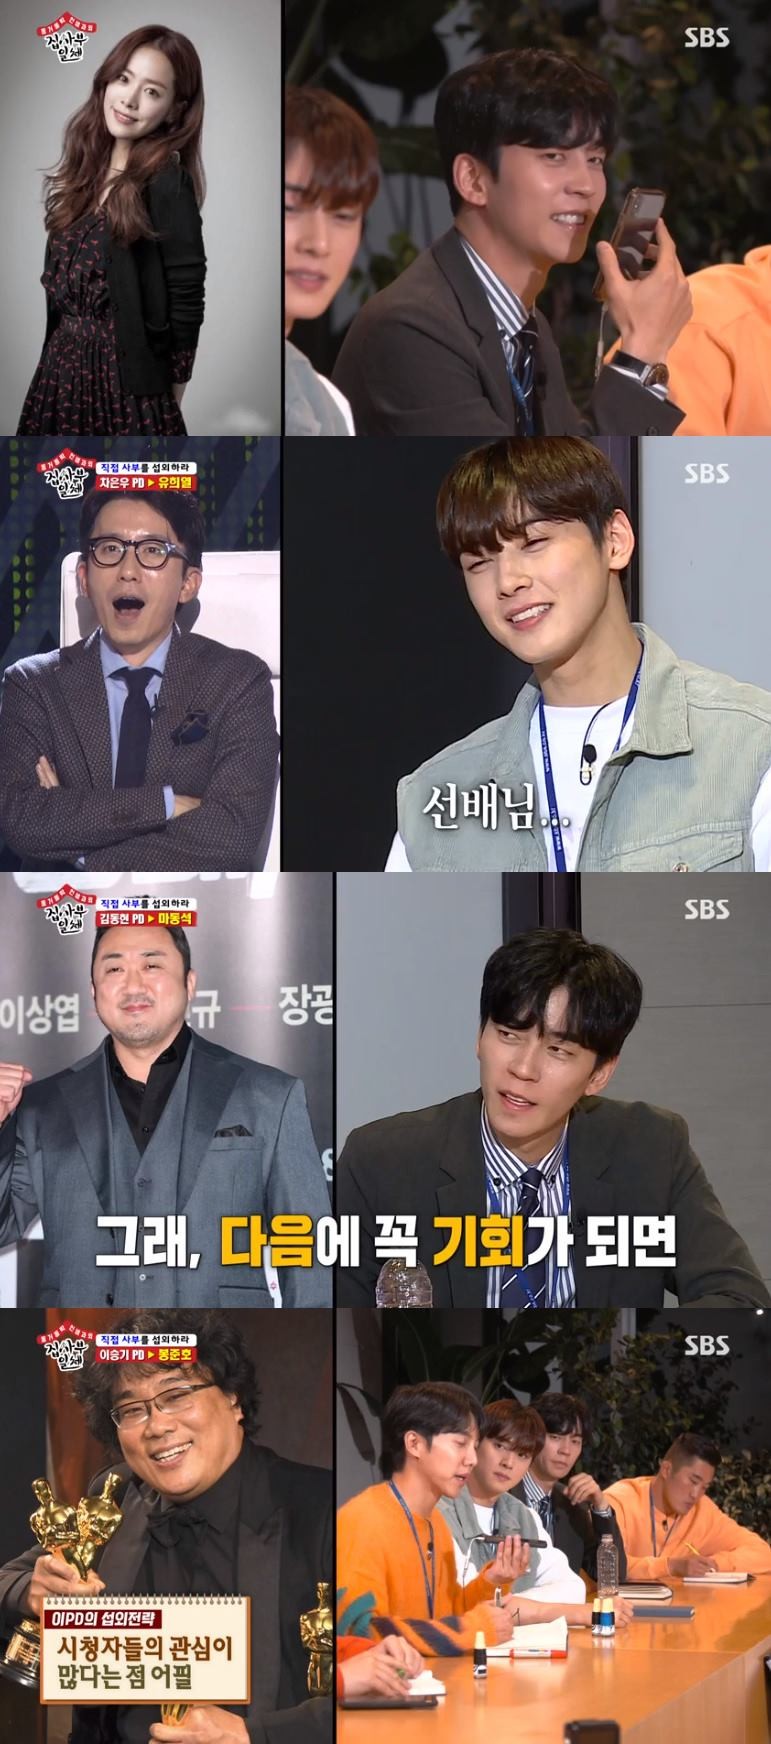 All The Butlers Cha Eun-woo and Lee Seung-gi were hired as PDs after SBS Announcer.On SBS All The Butlers broadcast on the 26th, last week, Cha Eun-woo and Kim Dong-Hyun were shown a broadcasting station experience.First, the SBS 8 News challenge was released, especially Cha Eun-woo and Lee Seung-gi, who played the role of a daily Announcer ahead of the live broadcast.They practiced in practice.Cha Eun-woo took on 8 News radio AnnouncerCha Eun-woo was even more nervous because of reports about Donald Ivana Trump, who had to report after the end of the word.Fortunately, Cha Eun-woo has gone through the troubles well, and has since progressed without clogging, especially with difficult words, and has shown off his remarkable ability with calm voice and pronunciation.Lee Seung-gi played as a sports announcer as it appeared on 8 News on March 30; Lee Seung-gi was worried about making many mistakes due to tension during practice.However, he showed a professional appearance on the air, and after the broadcast he was praised by anchors.The final interviewer for the members entertainment PD was released.Choi Young-in, general manager of the SBS Entertainment Awards ceremony last year, Park Sung-hoon CP and Kwak Seung-young CP, together as judges.First, the results of the first final mission Editing were released; the members had four hours of editing before; for the first time, an edited version of Cha Eun-woo was released.His video was Cha Eun-woo direct cam. Kwak Seung-young CP praised the theme is excellent and laughed.Lee Seung-gi showed amazing editing skills by using various cuts, but he laughed at the Devils Editing.By editing what he and Cha Eun-woo said, Cha Eun-woo led to the answer that he wanted to fix All The Butlers.Kim Dong-Hyun also added a laugh, editing only to stand out like Cha Eun-woo.The second final mission was Submission. Each of them was to invite Master All The Butlers as an intern PD. The first person to step out was Shin Sung-rok.He called Han Ji-min, who looked like a furious relationship.Han Ji-min couldnt stop laughing at Shin Sung-roks passionate posture; Shin Sung-rok was praised for his persuasiveness.Cha Eun-woo contacted You Hee-yeol, who was delighted to receive Cha Eun-woos call but changed after completing the situation.Especially when Cha Eun-woo actively said, Where are you now?, You Hee-yeol laughed, saying, Is this friend more than I look at?But Cha Eun-woo appeared convincing, explaining the reasons he called, and he, too, was praised.Yang Se-hyeong called Baek Jong-won, who was on the air.Baek Jong-won was embarrassed to say, I am a master, but he showed his mind to persuade Yang Se-hyeong.He replied, I will try to think about it because it is a good idea. He also invited members to his house.Kim Dong-Hyun called Ma Dong-Seok, who was unable to stop the tension but explained why he wanted to be a master.This led to the success of getting Ma Dong-Seoks promise to appear; Lee Seung-gi contacted Bong Joon-ho.Unfortunately, the phone was off, and Lee Seung-gi left a voice message: his excellent speech skills were admirable.Finally, the final results were announced: Mr. Lee Seung-gi is too seasoned, and Mr. Cha Eun-woo has grown greatly in a short period of time, said Choe Yeong, general manager.Cha Eun-woo then said he hired as a new PD and Lee Seung-gi as a career PD, respectively; Cha Eun-woo and Lee Seung-gi shared their joy together.